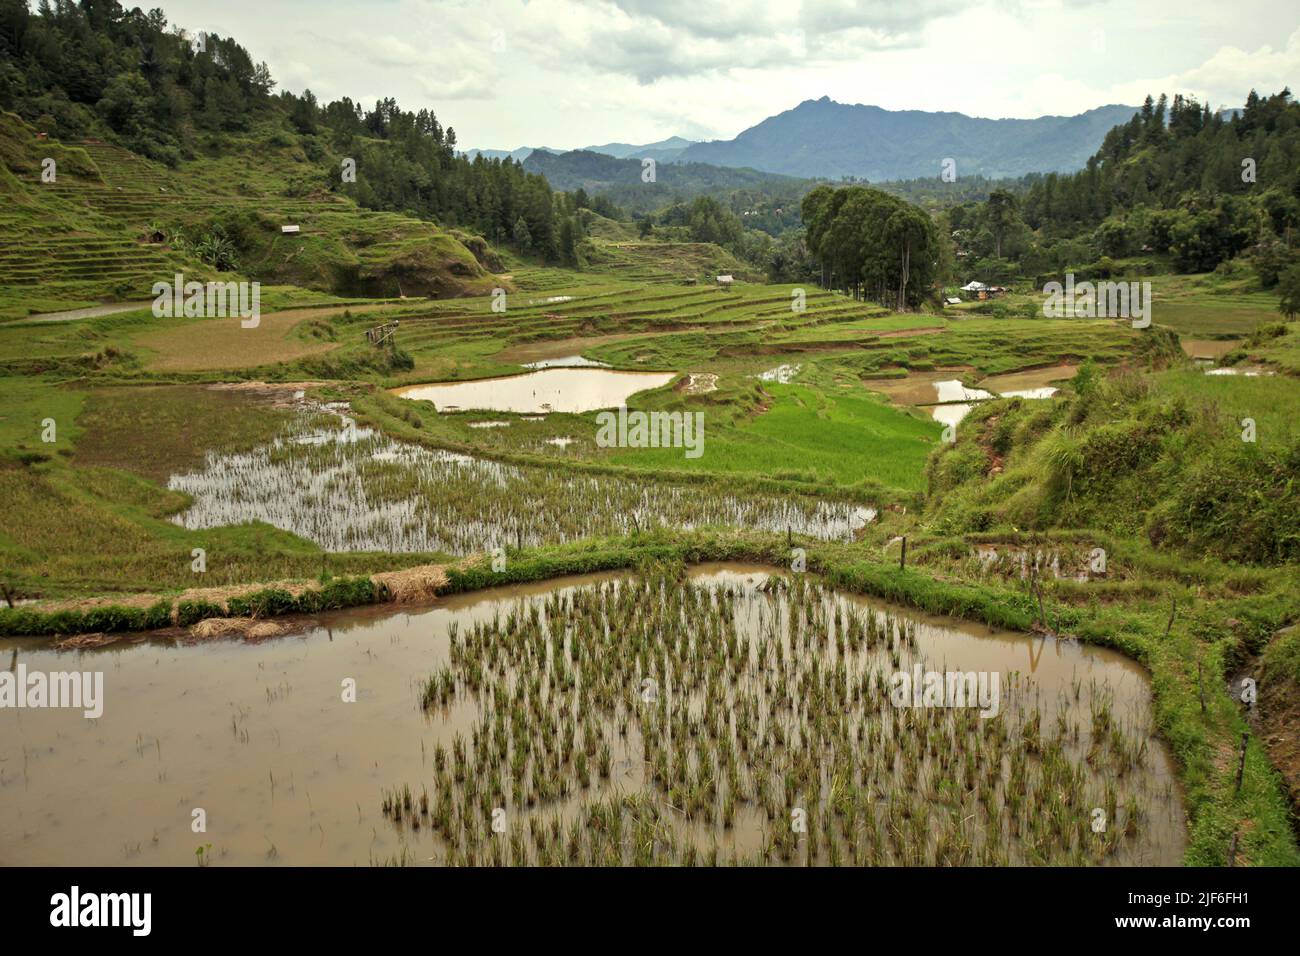 Rice paddies in Batutumonga, Lempo, North Toraja, South Sulawesi, Indonesia. Higher temperatures caused by global warming are projected to reduce rice crop yields in Indonesia. Changes in El Nino patterns, that impact the onset and length of the wet season, are also sending agricultural production to a vulnerable status. Developing new, or improved local rice varieties that more resilient—echoing recent studies in other countries—could be one of the keys to mitigate. Stock Photo